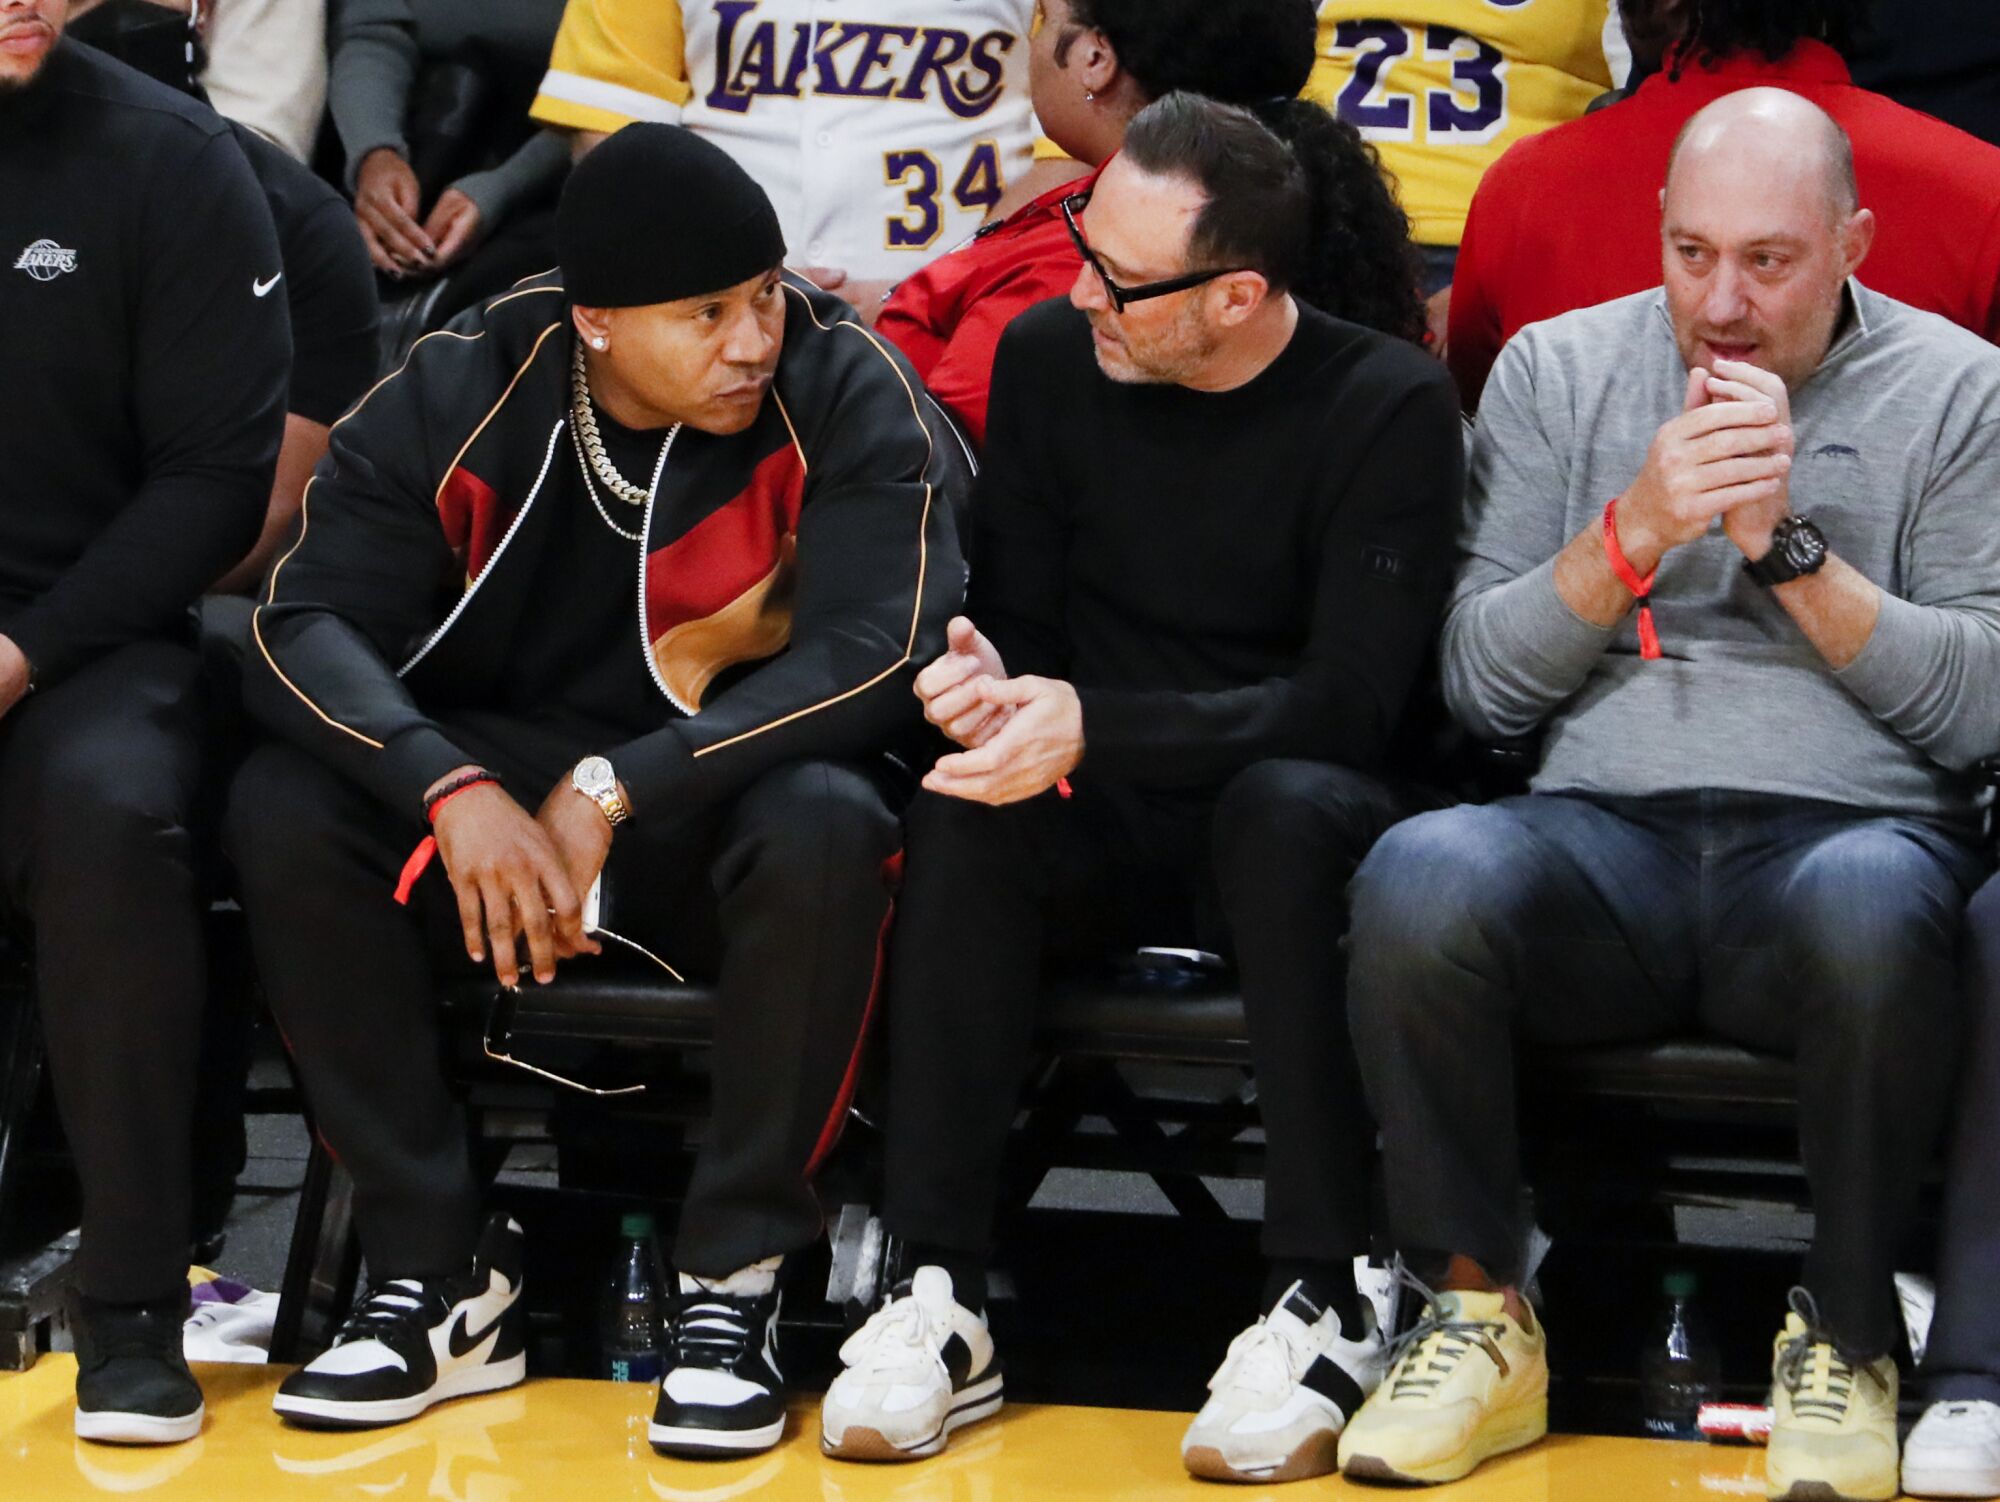 Musician LL Cool J watches the game during the first quarter.